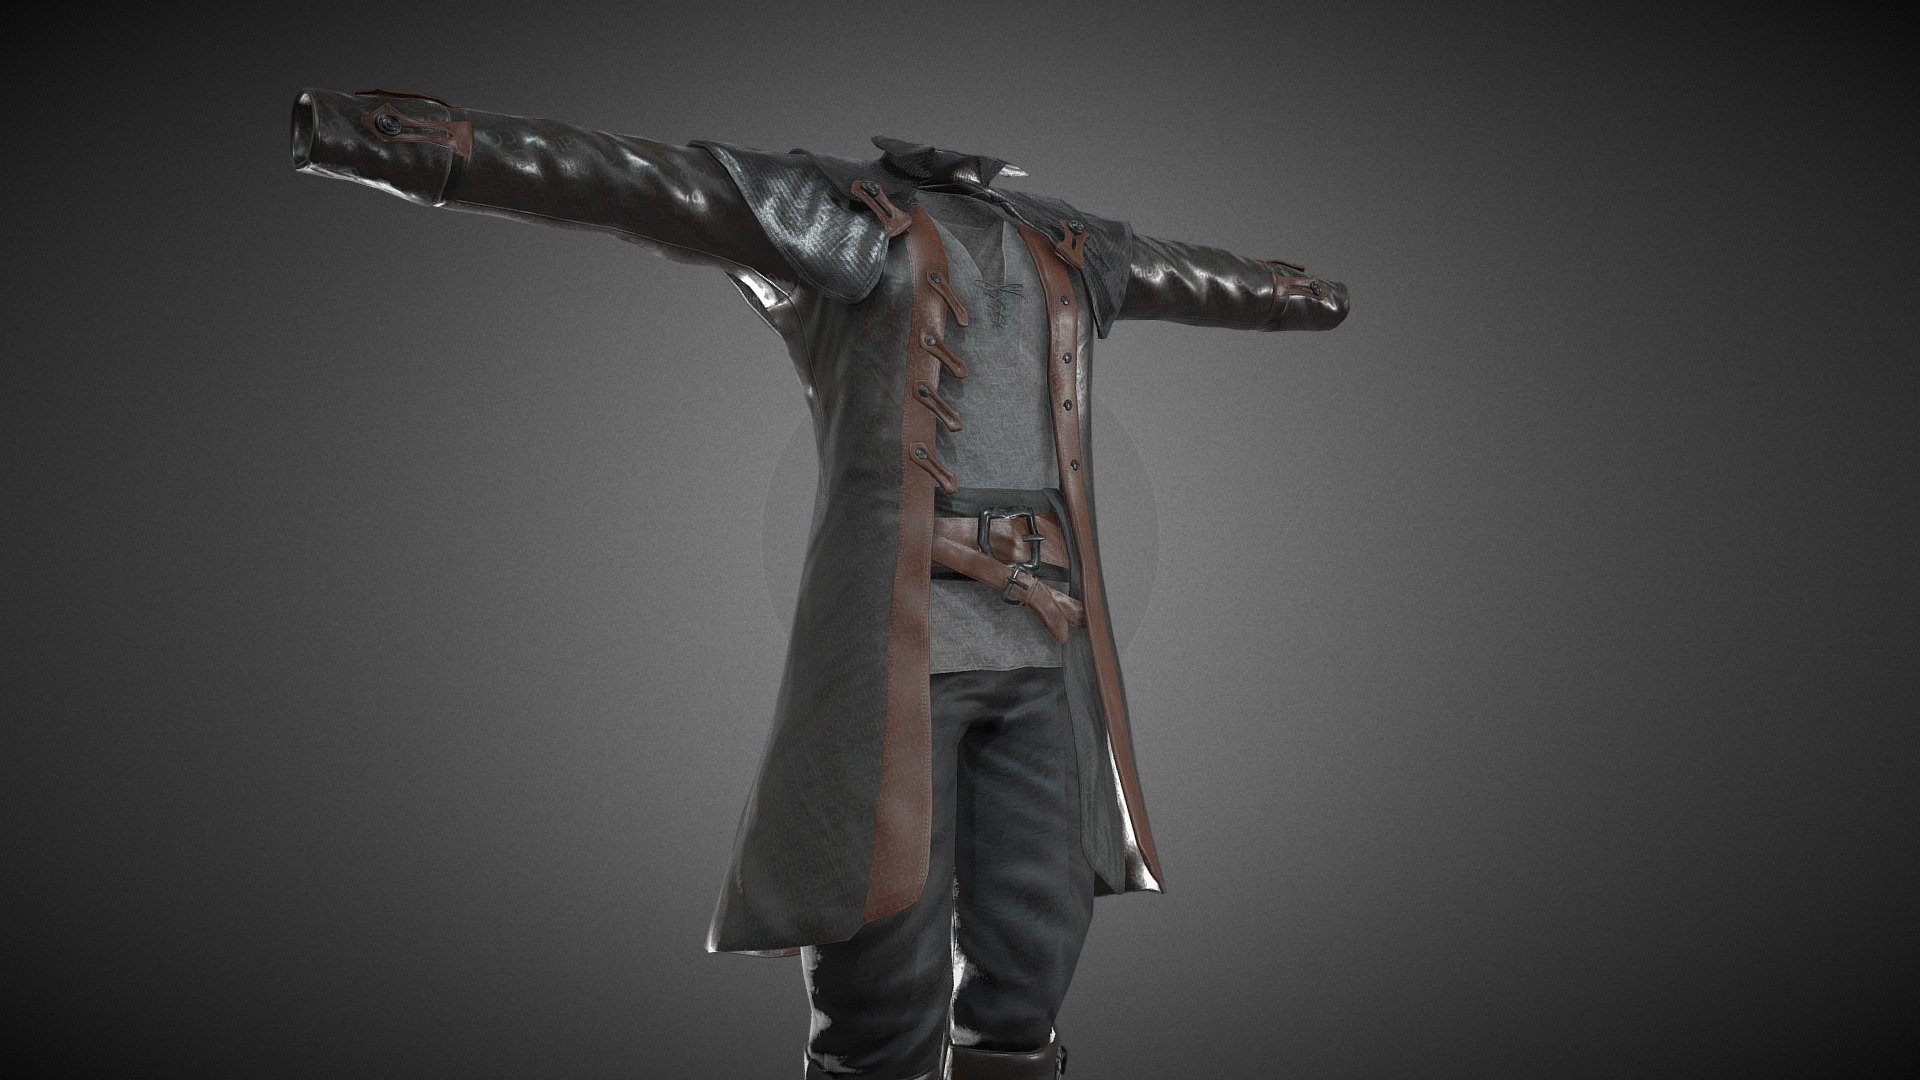 CG StudioX Present :
Male Pirate Outfit lowpoly/PBR




This is Male Pirate Outfit Comes with Specular and Metalness PBR.

The photo been rendered using Marmoset Toolbag 3 (real time game engine )


Features :



Comes with Specular and Metalness PBR 4K texture .

Good topology.

Low polygon geometry.

The Model is prefect for game for both Specular workflow as in Unity and Metalness as in Unreal engine .

The model also rendered using Marmoset Toolbag 3 with both Specular and Metalness PBR and also included in the product with the full texture.

The product has ID map in every part for changing any part in the model .

The texture can be easily adjustable .


Texture :



ALL Texture [Albedo -Normal-Metalness -Roughness-Gloss-Specular-ID-AO] (4096*4096)

Three objects (Top-Pants-Boots) each one has it own UV set and textures.


Files :
Marmoset Toolbag 3 ,Maya,,FBX,OBj with all the textures.




Contact me for if you have any questions.
 - Male Pirate Outfit - Buy Royalty Free 3D model by CG StudioX (@CG_StudioX) 3d model